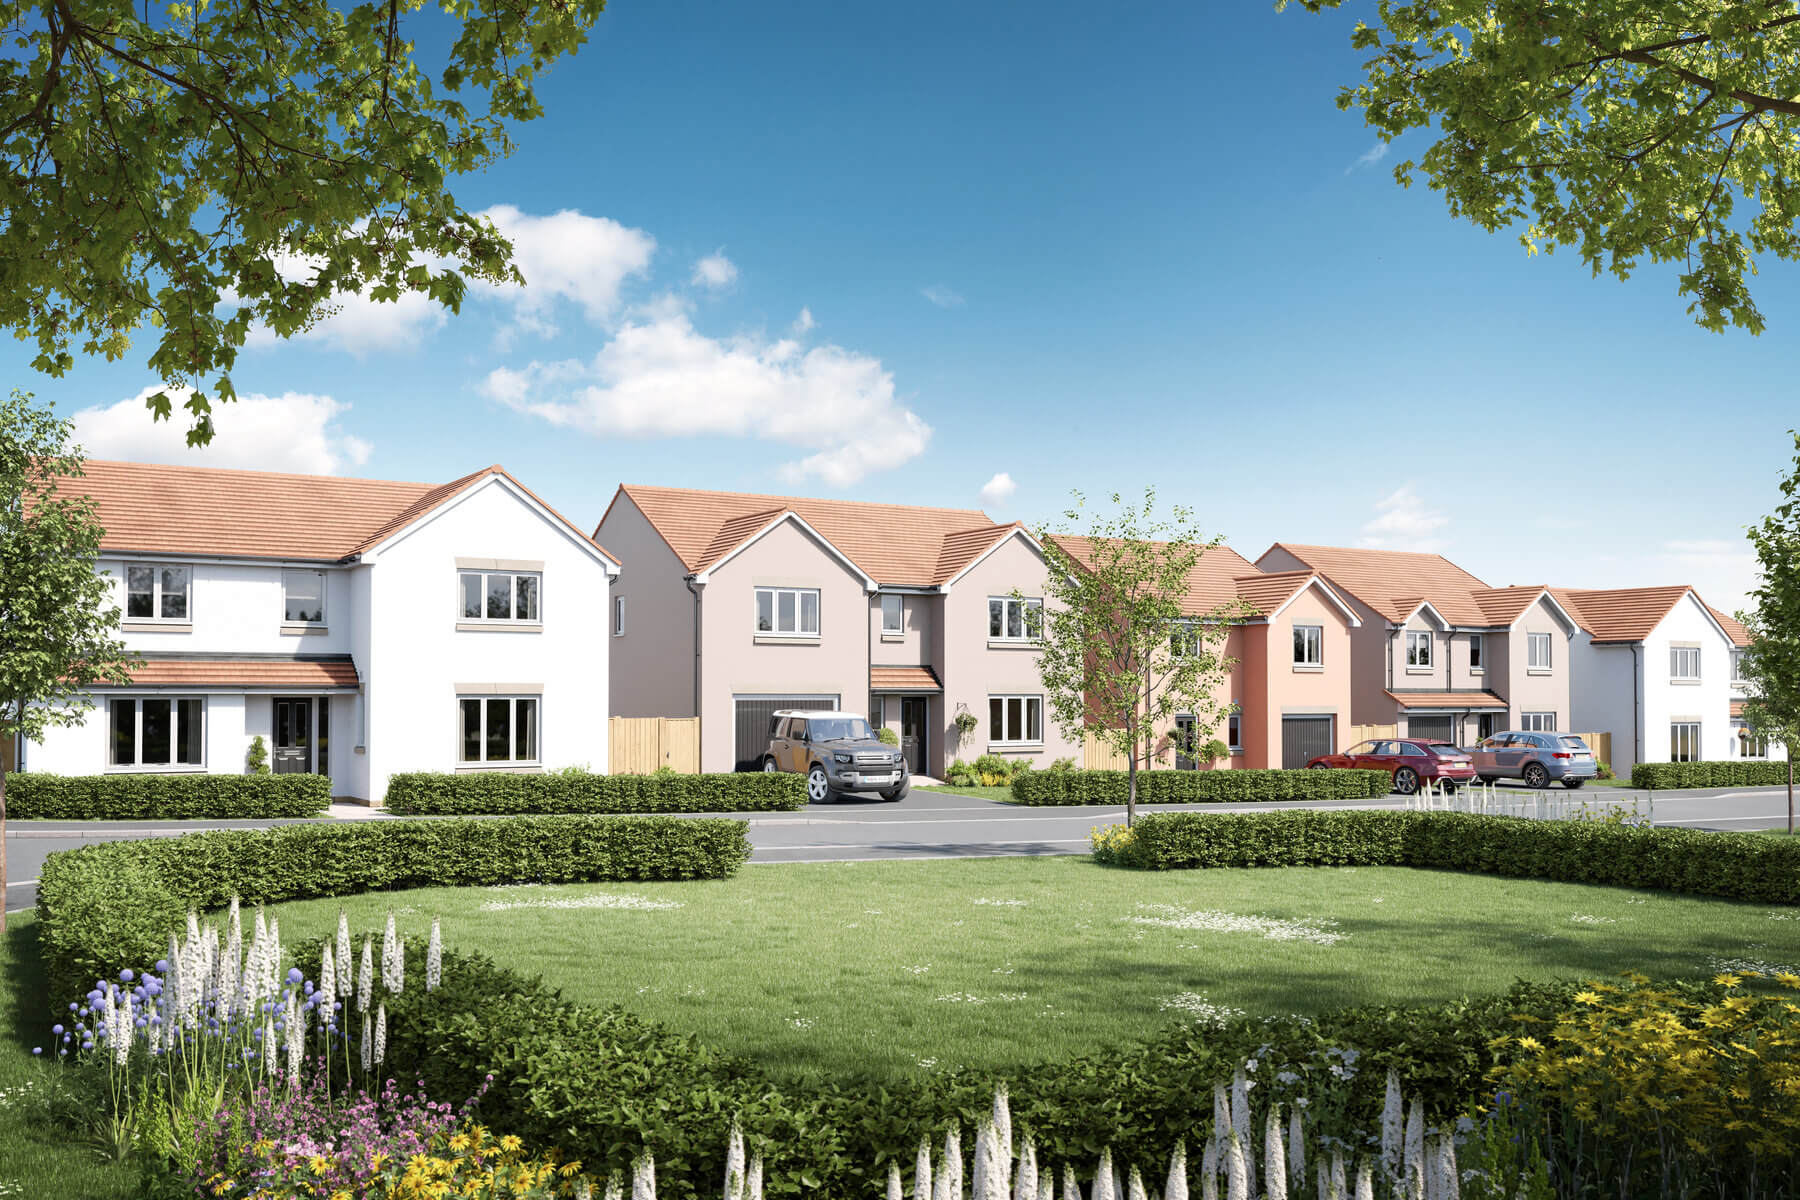 Work starts at Taylor Wimpey’s next phase of development in Wallyford